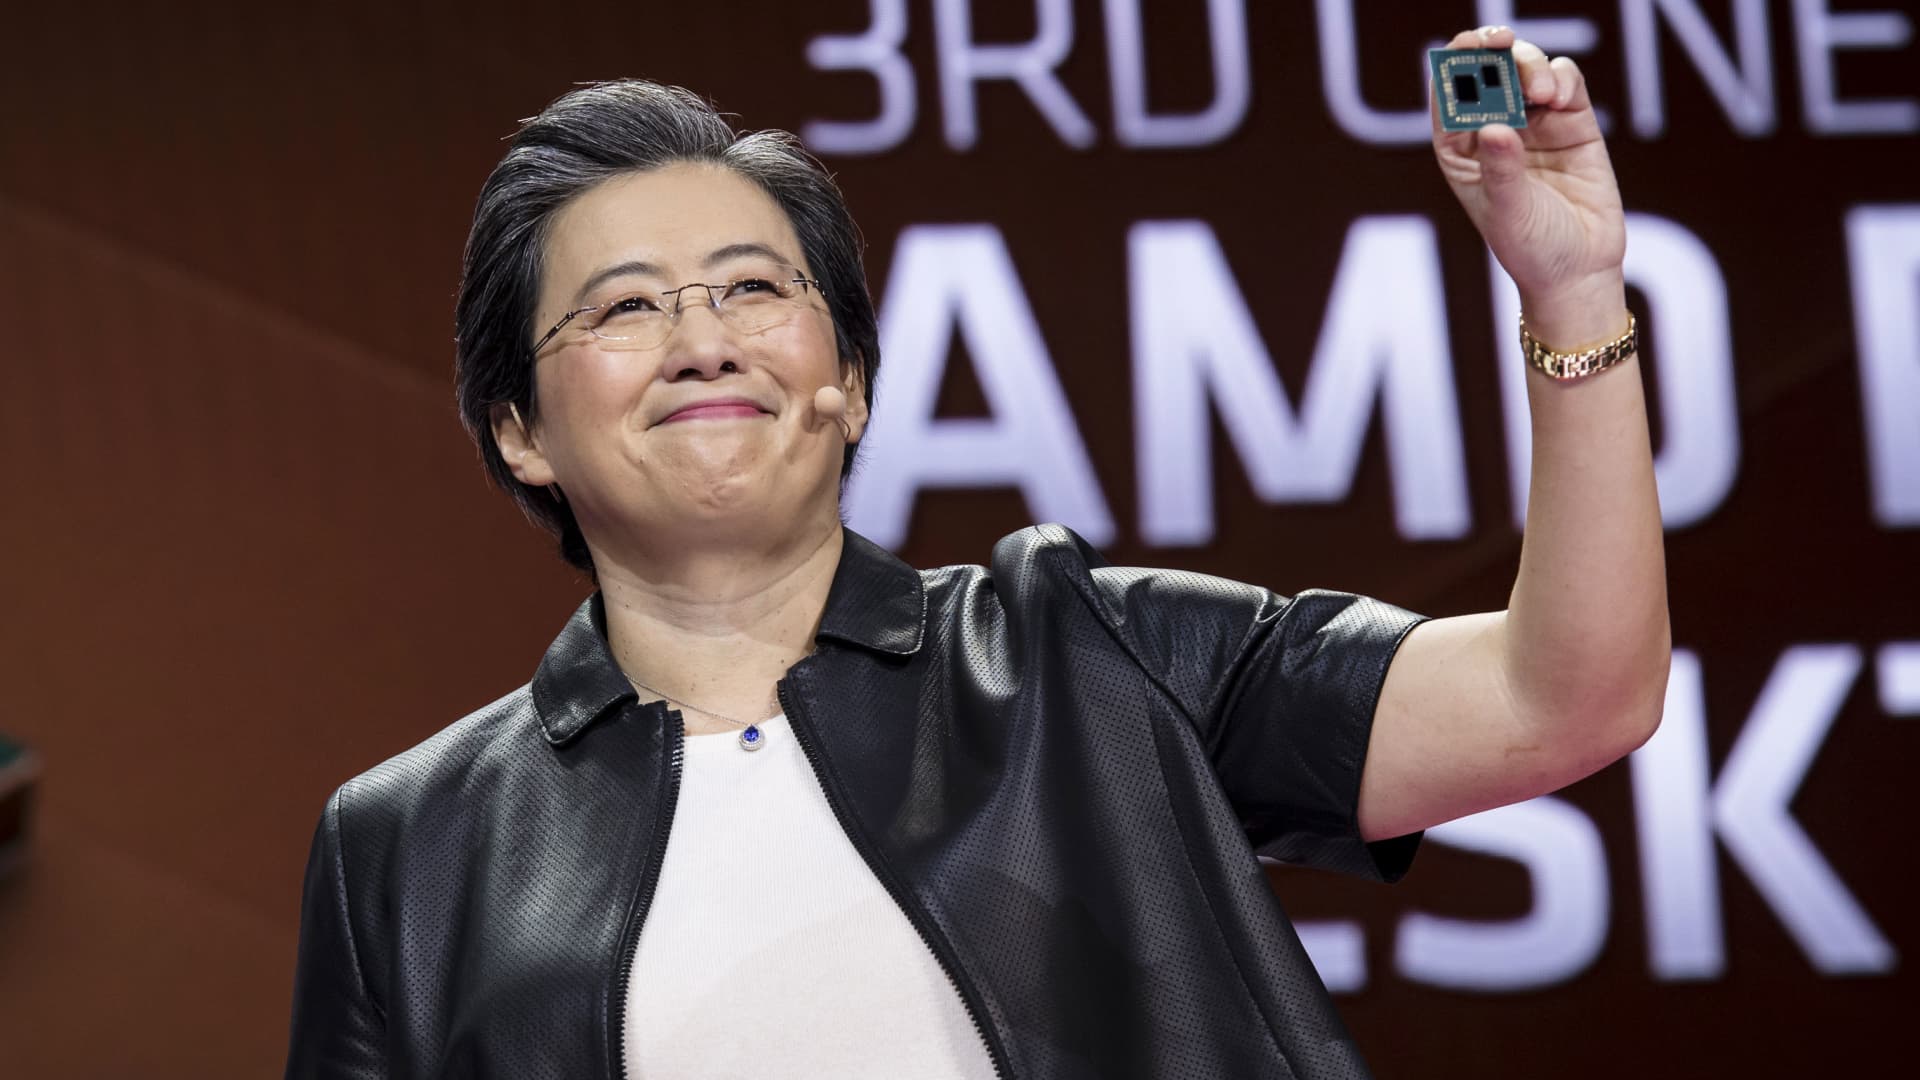 AMD shares fall more than 13% on weak outlook, dragging chipmakers down